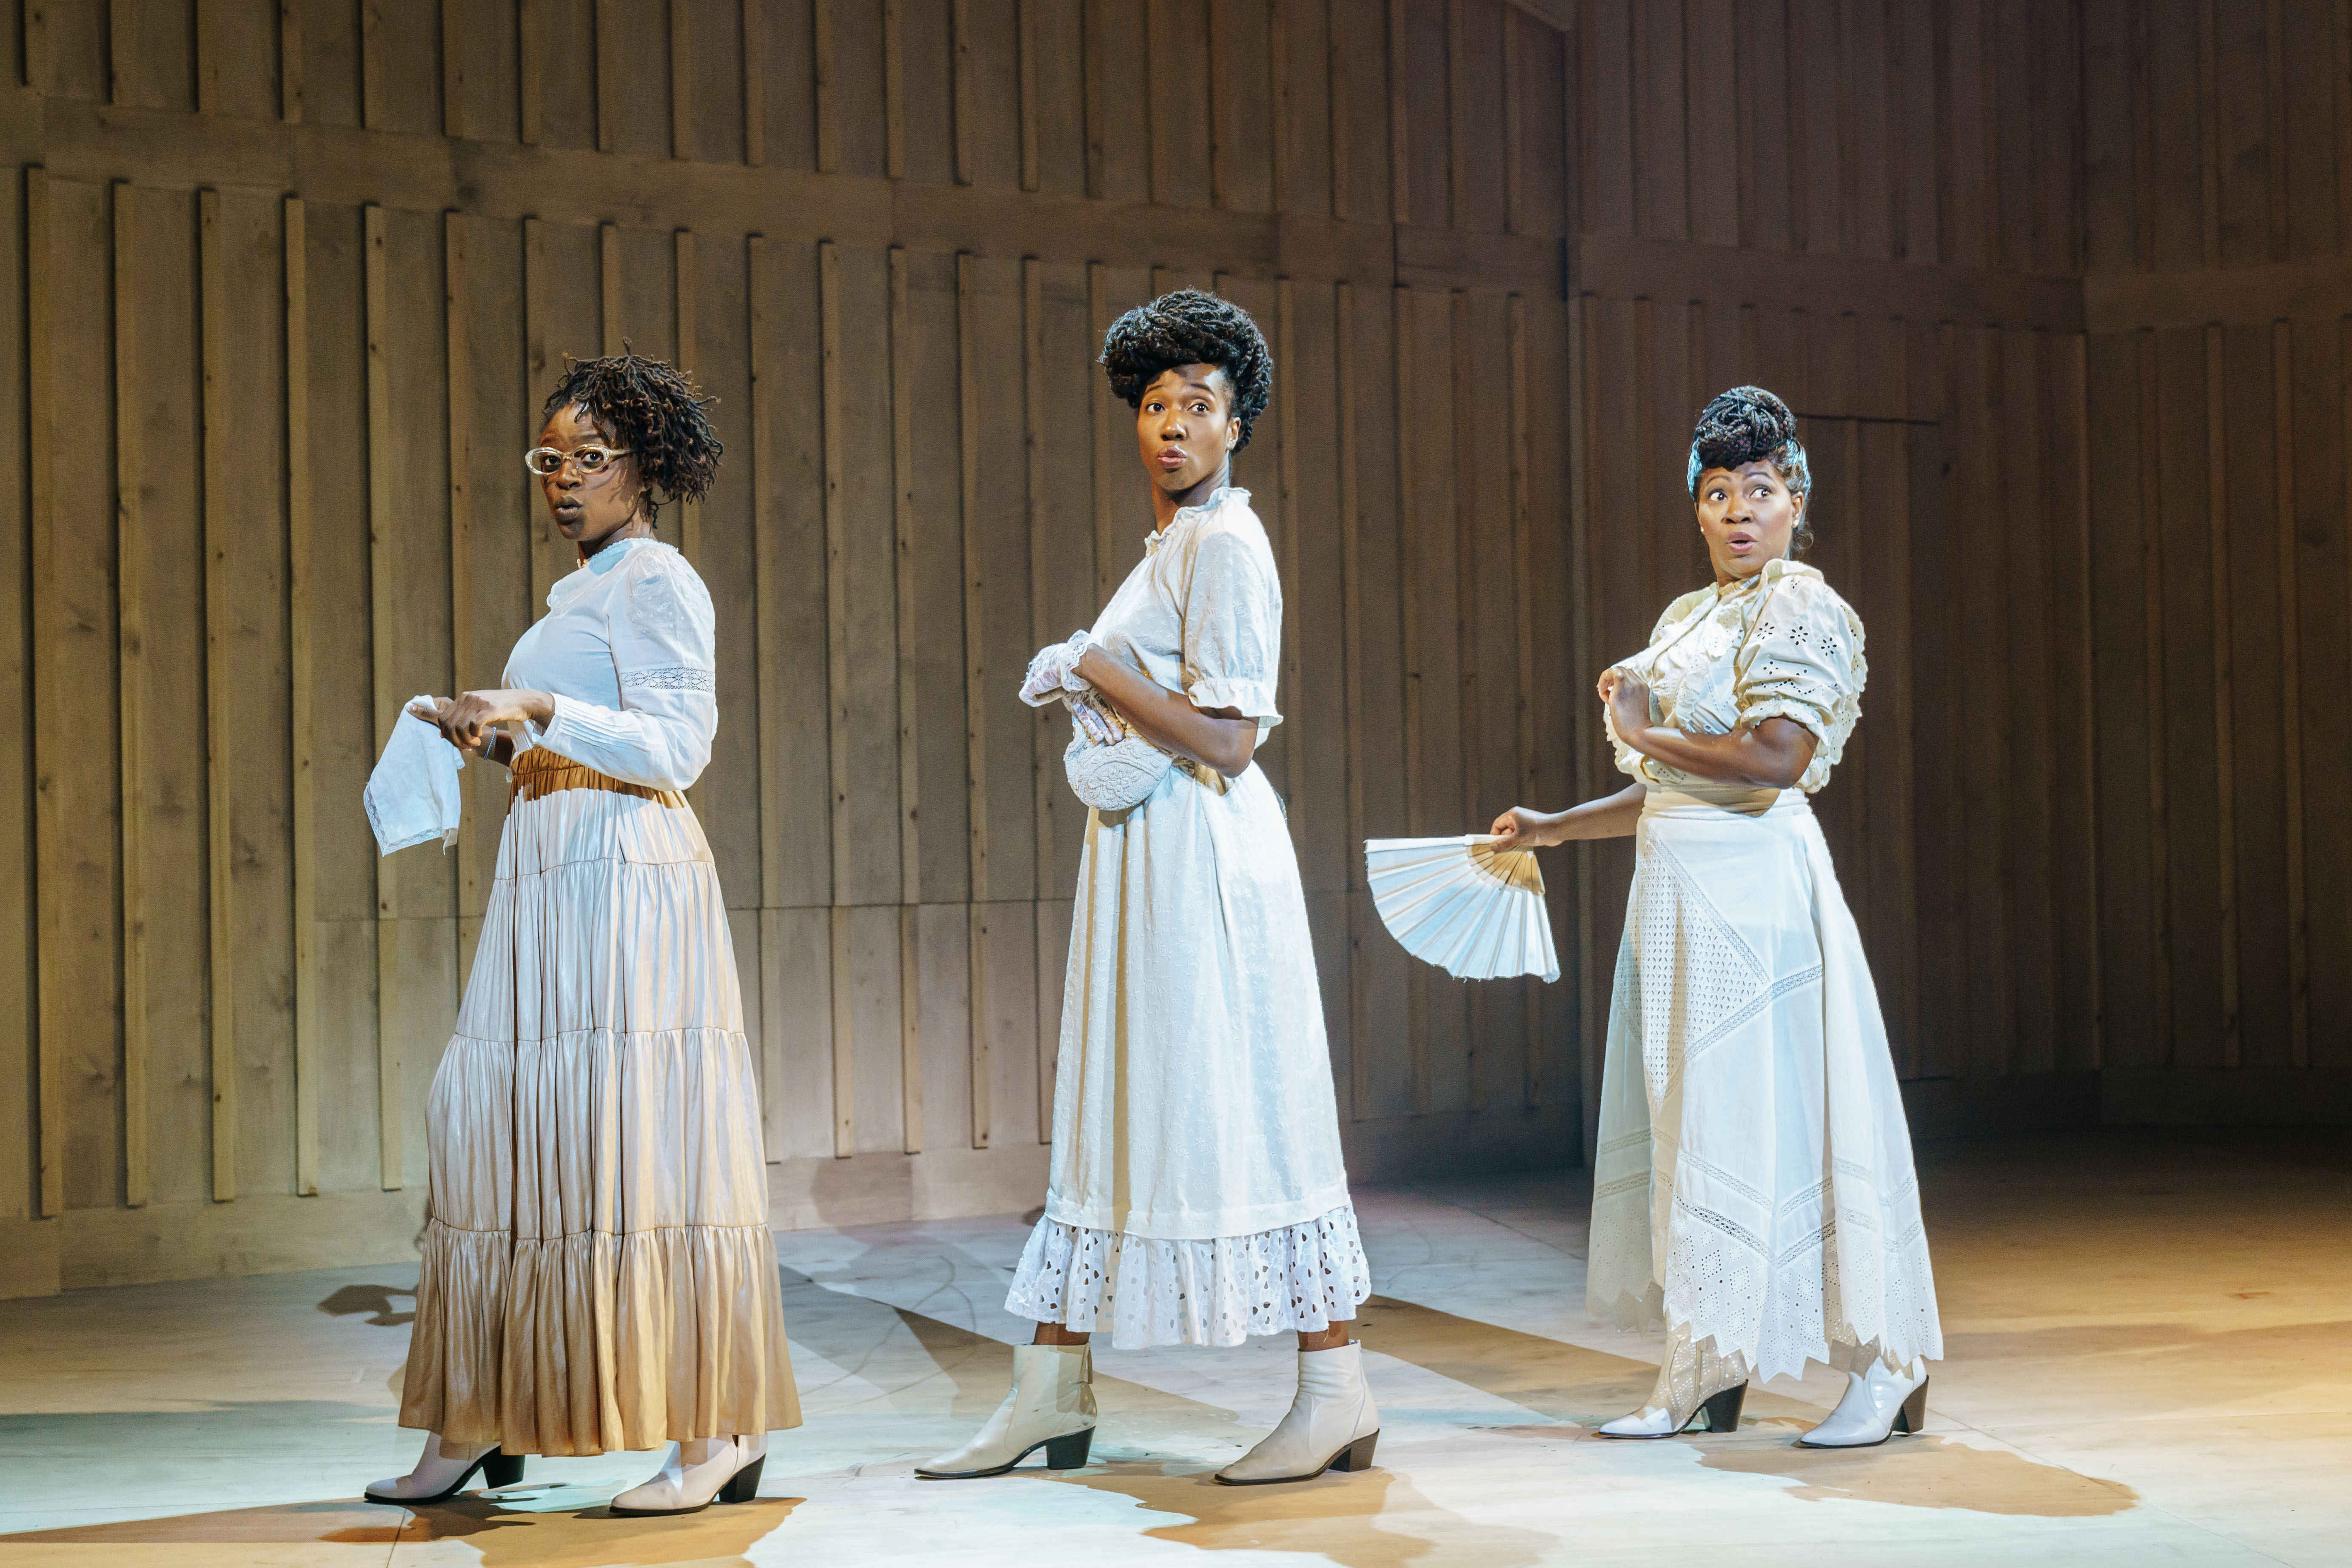 Production image from The Color Purple. Rosemary Annabella Nkrumah as Darlene, Danielle Kassaraté as Doris and Landi Oshinowo as Jarene stand on their sides singing in white, frilly cotton dresses against light panelling.